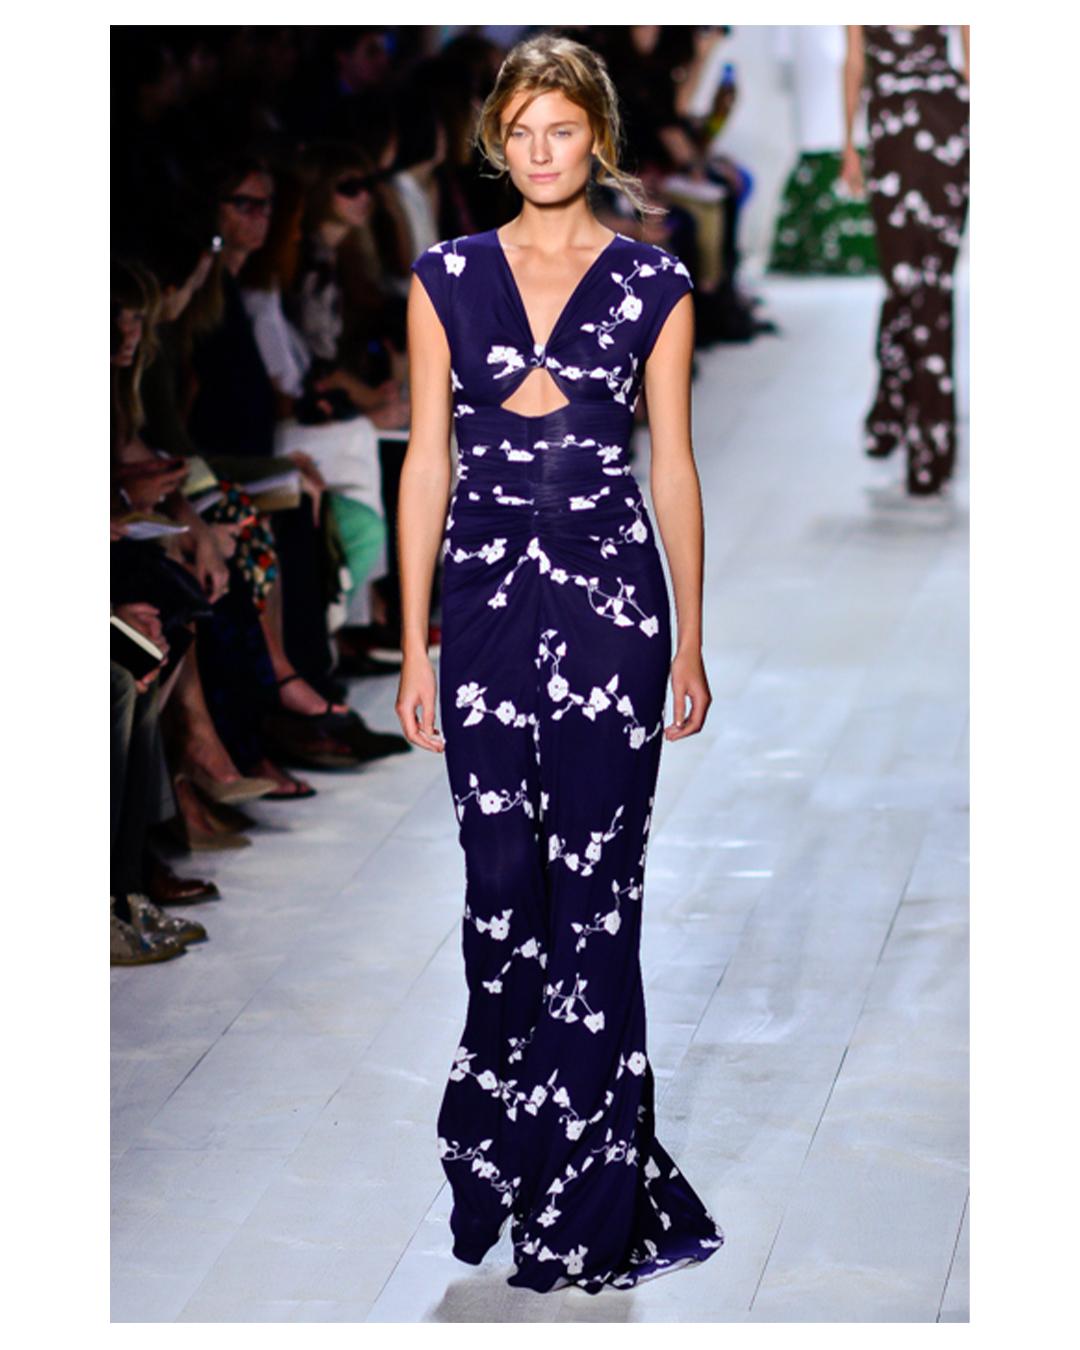 LOVE LALI Vintage

Michael Kors Spring 2014 Asian inspired dress
Blue with white floral print 
V neckline with a keyhole cut out at bust
Sleeveless   
Ruched cinched in waist
Cut out back
Stretch fabric 
Hooks at the back of the neck
Concealed back